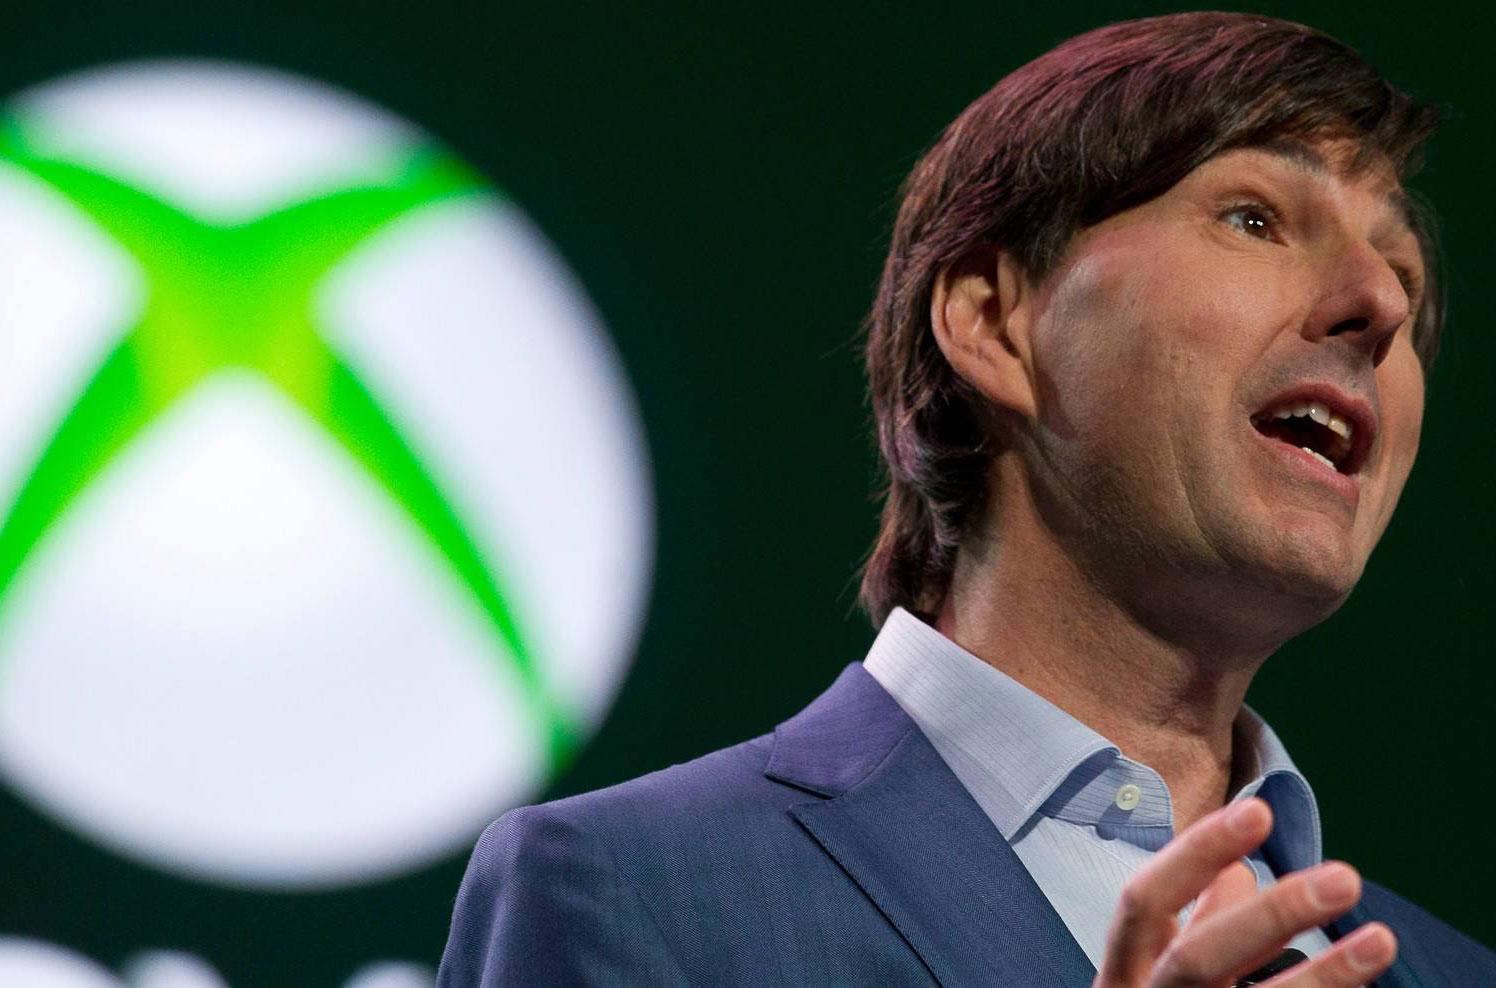 Sport Rijden incident How new Zynga CEO and former Xbox boss Don Mattrick went from gamemaker to  executive playmaker | Digital Trends